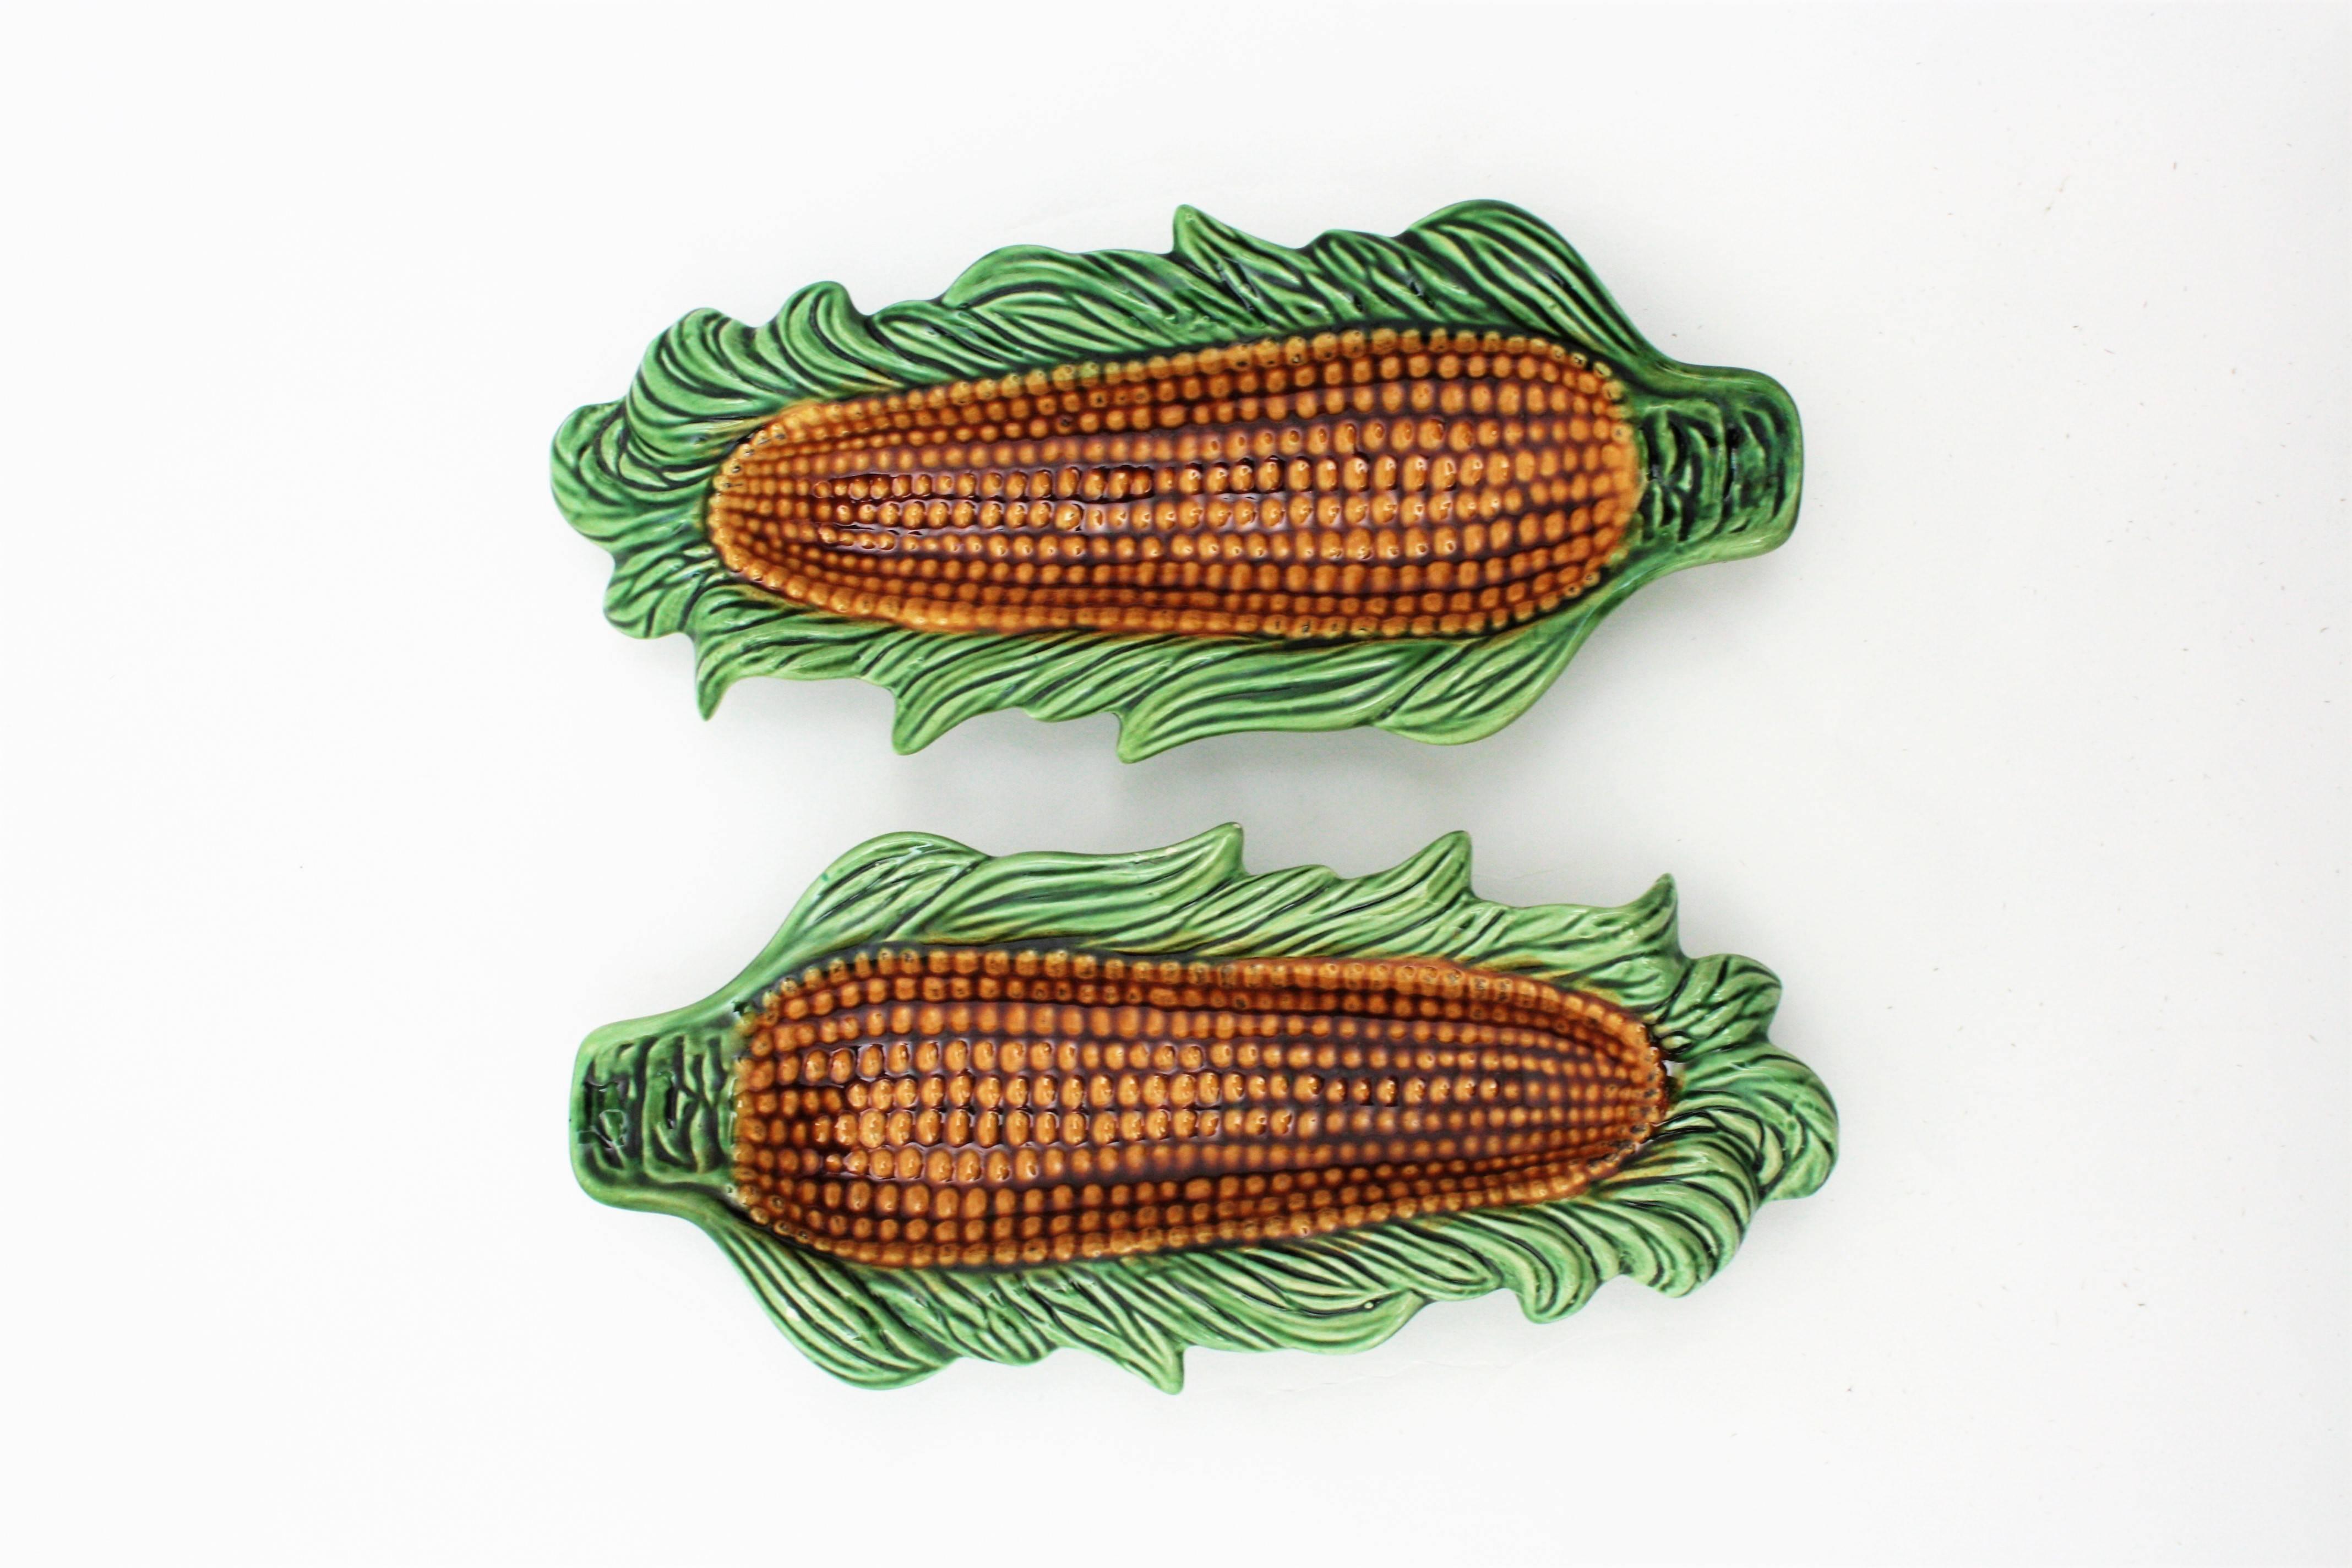 Portuguese Pair of Midcentury Glazed Ceramic Corn on the Cob Dishes, Portugal, 1960s For Sale